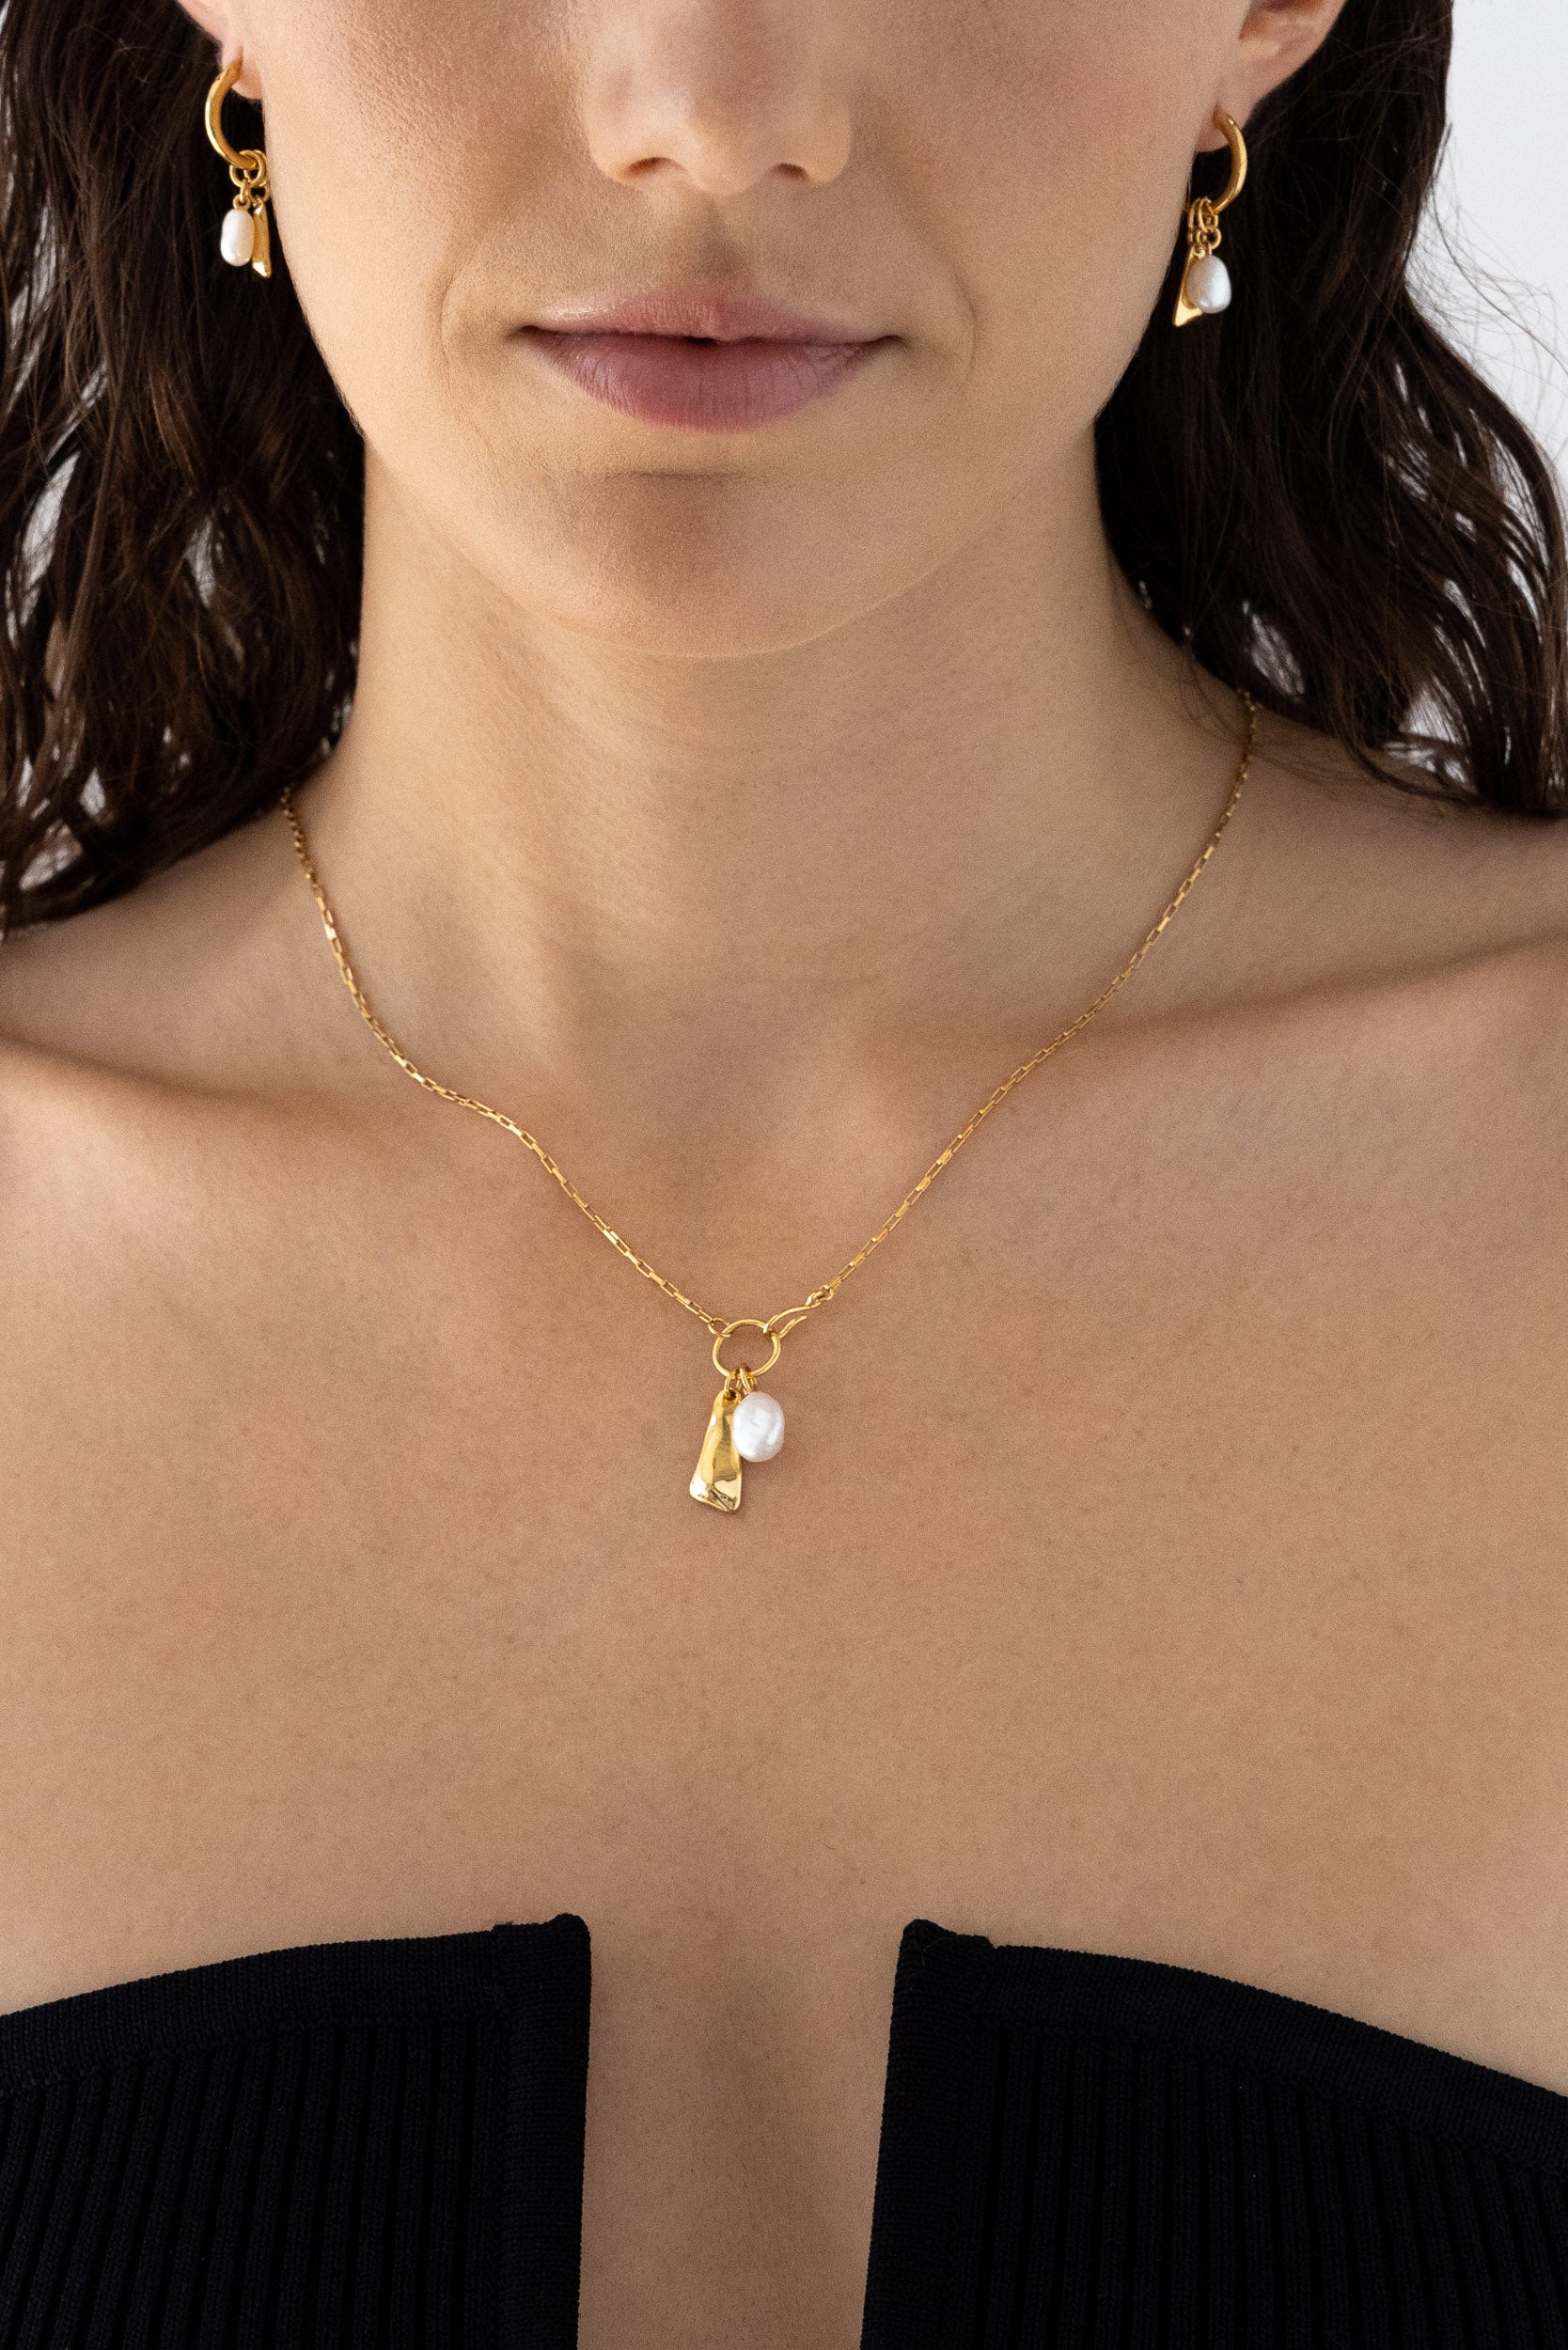 Tag Necklace - Gold